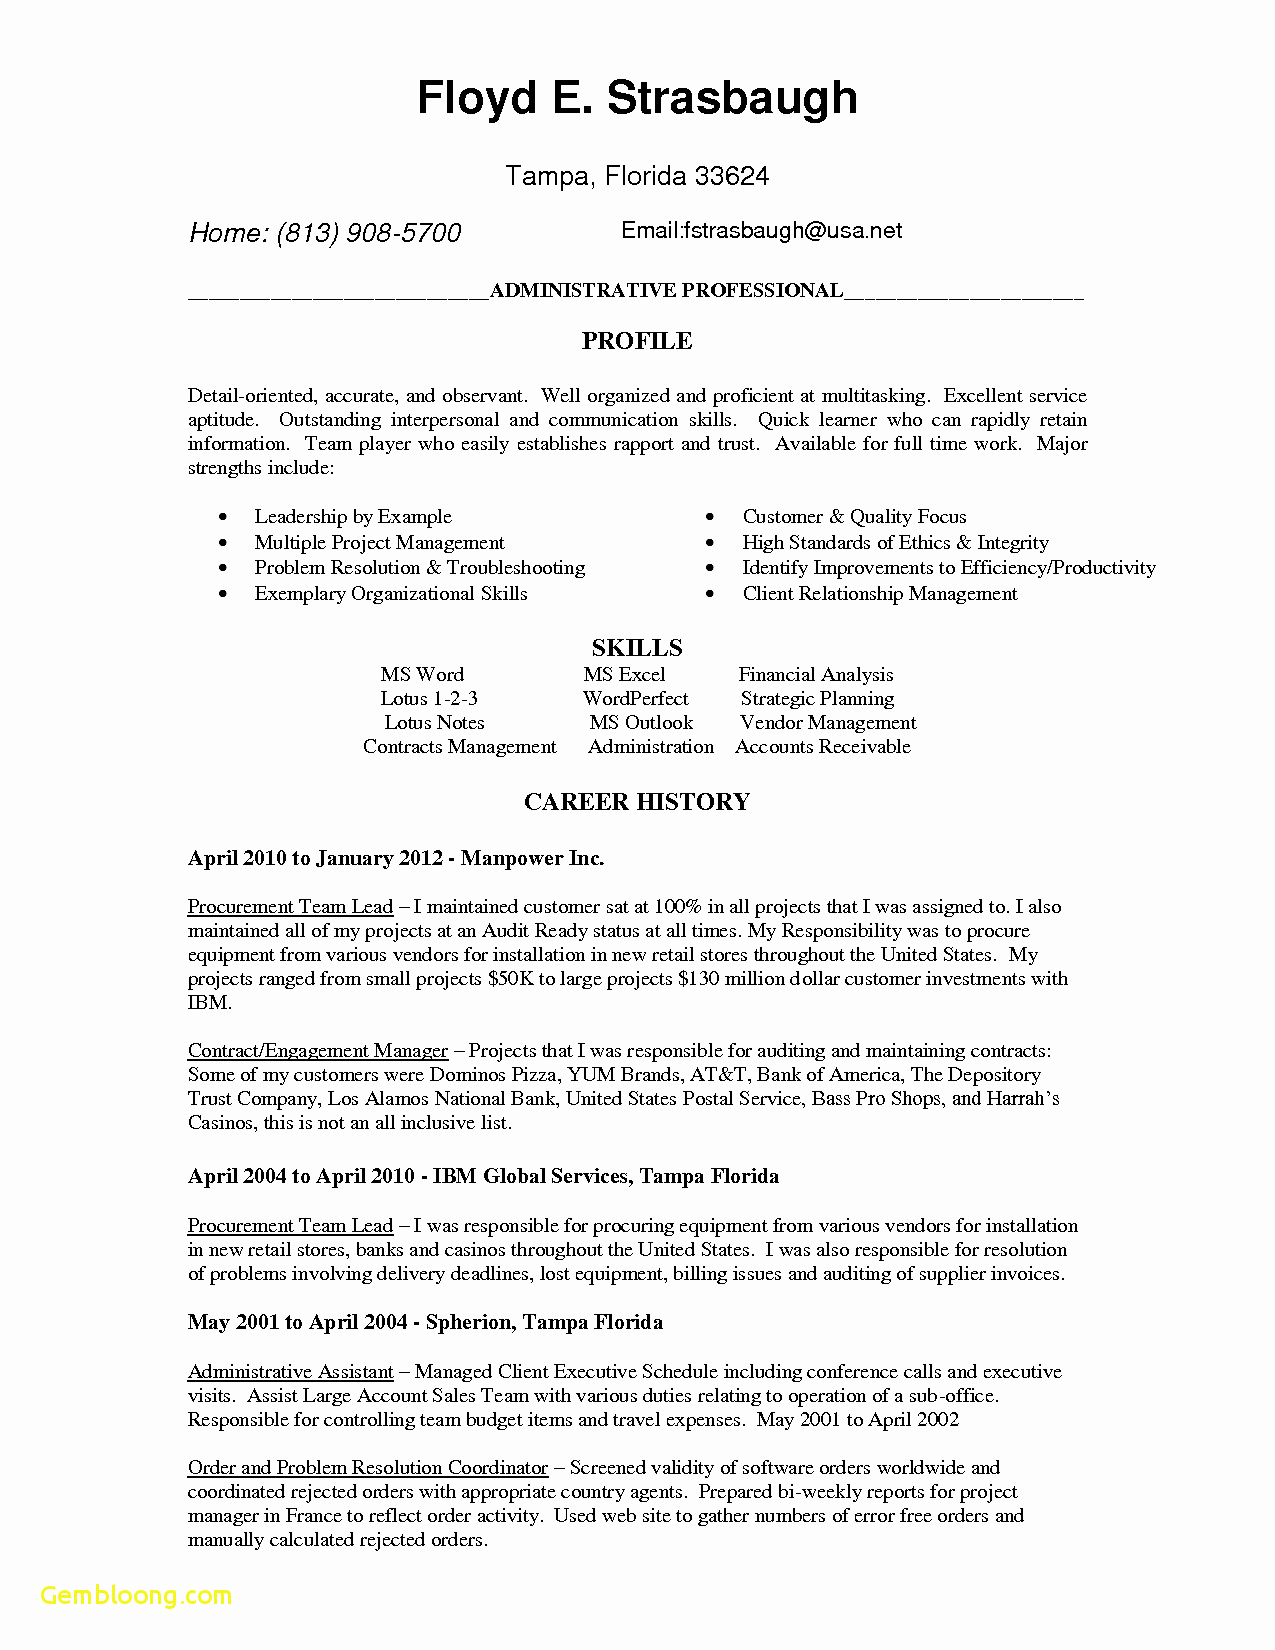 engagement letter template for accountants Collection-Accounting Jobs Cover Letter Beautiful Resume Templates Sample New Professional Job Resume Template Od 17-q